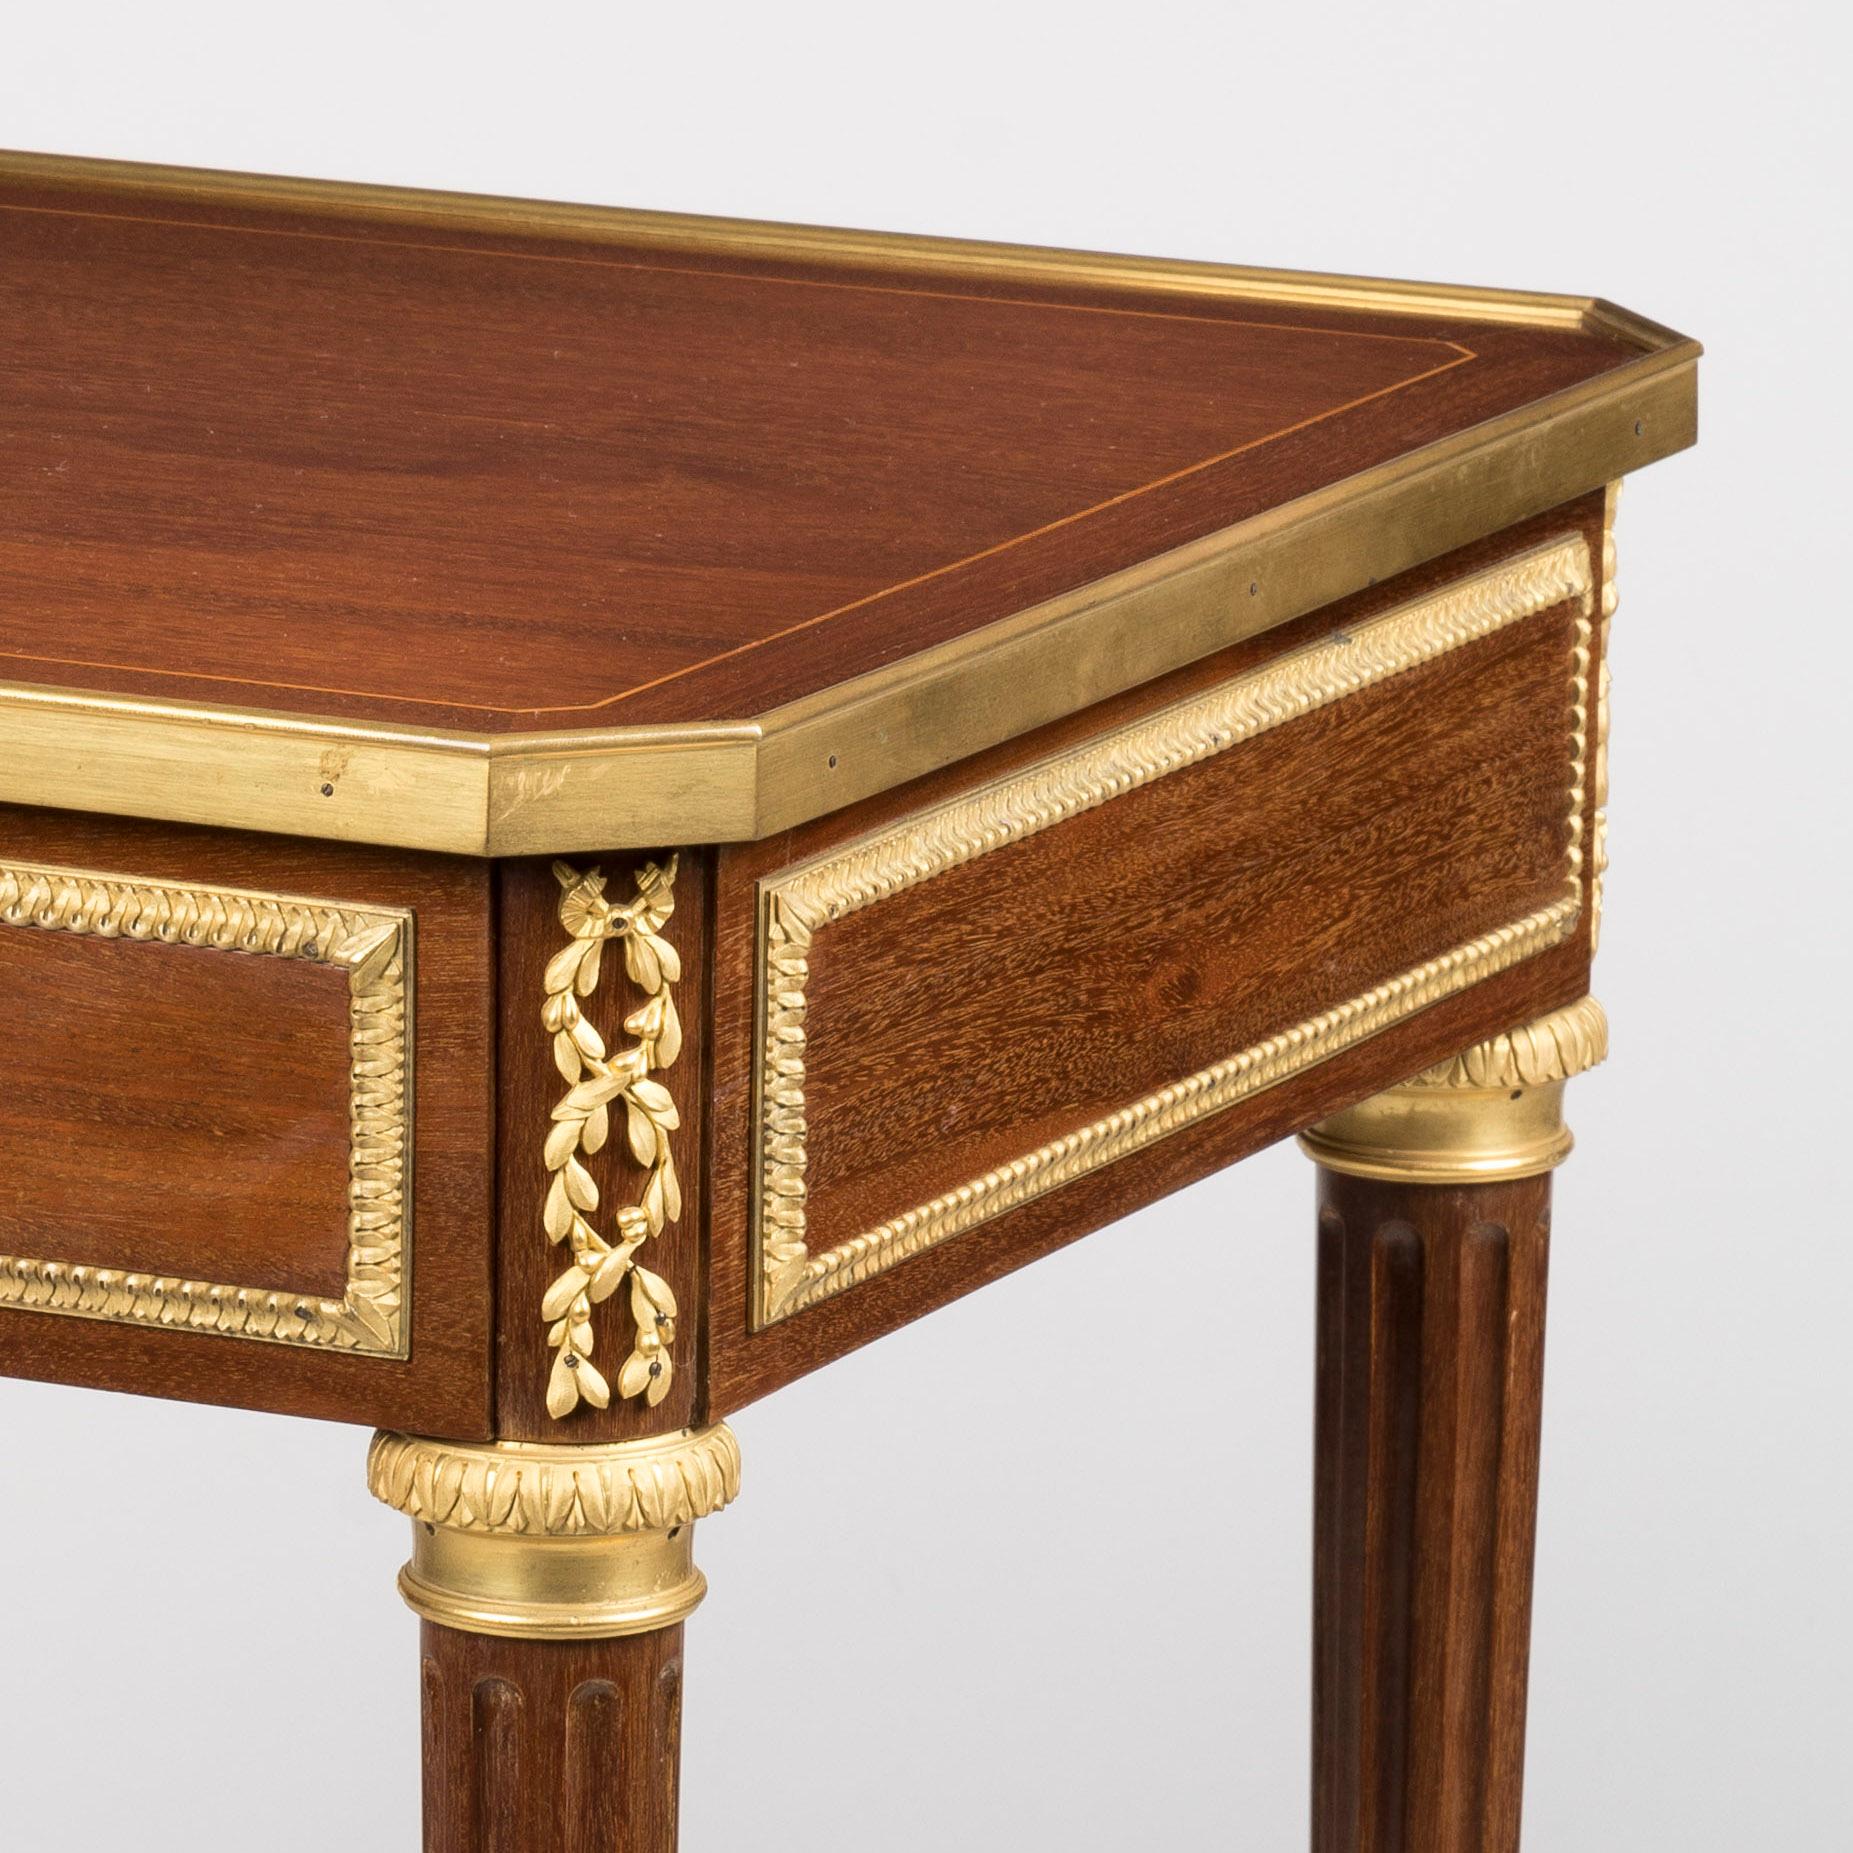 Ormolu 19th Century French Belle Époque Table in the Louis XVI Style by Lexcellent For Sale